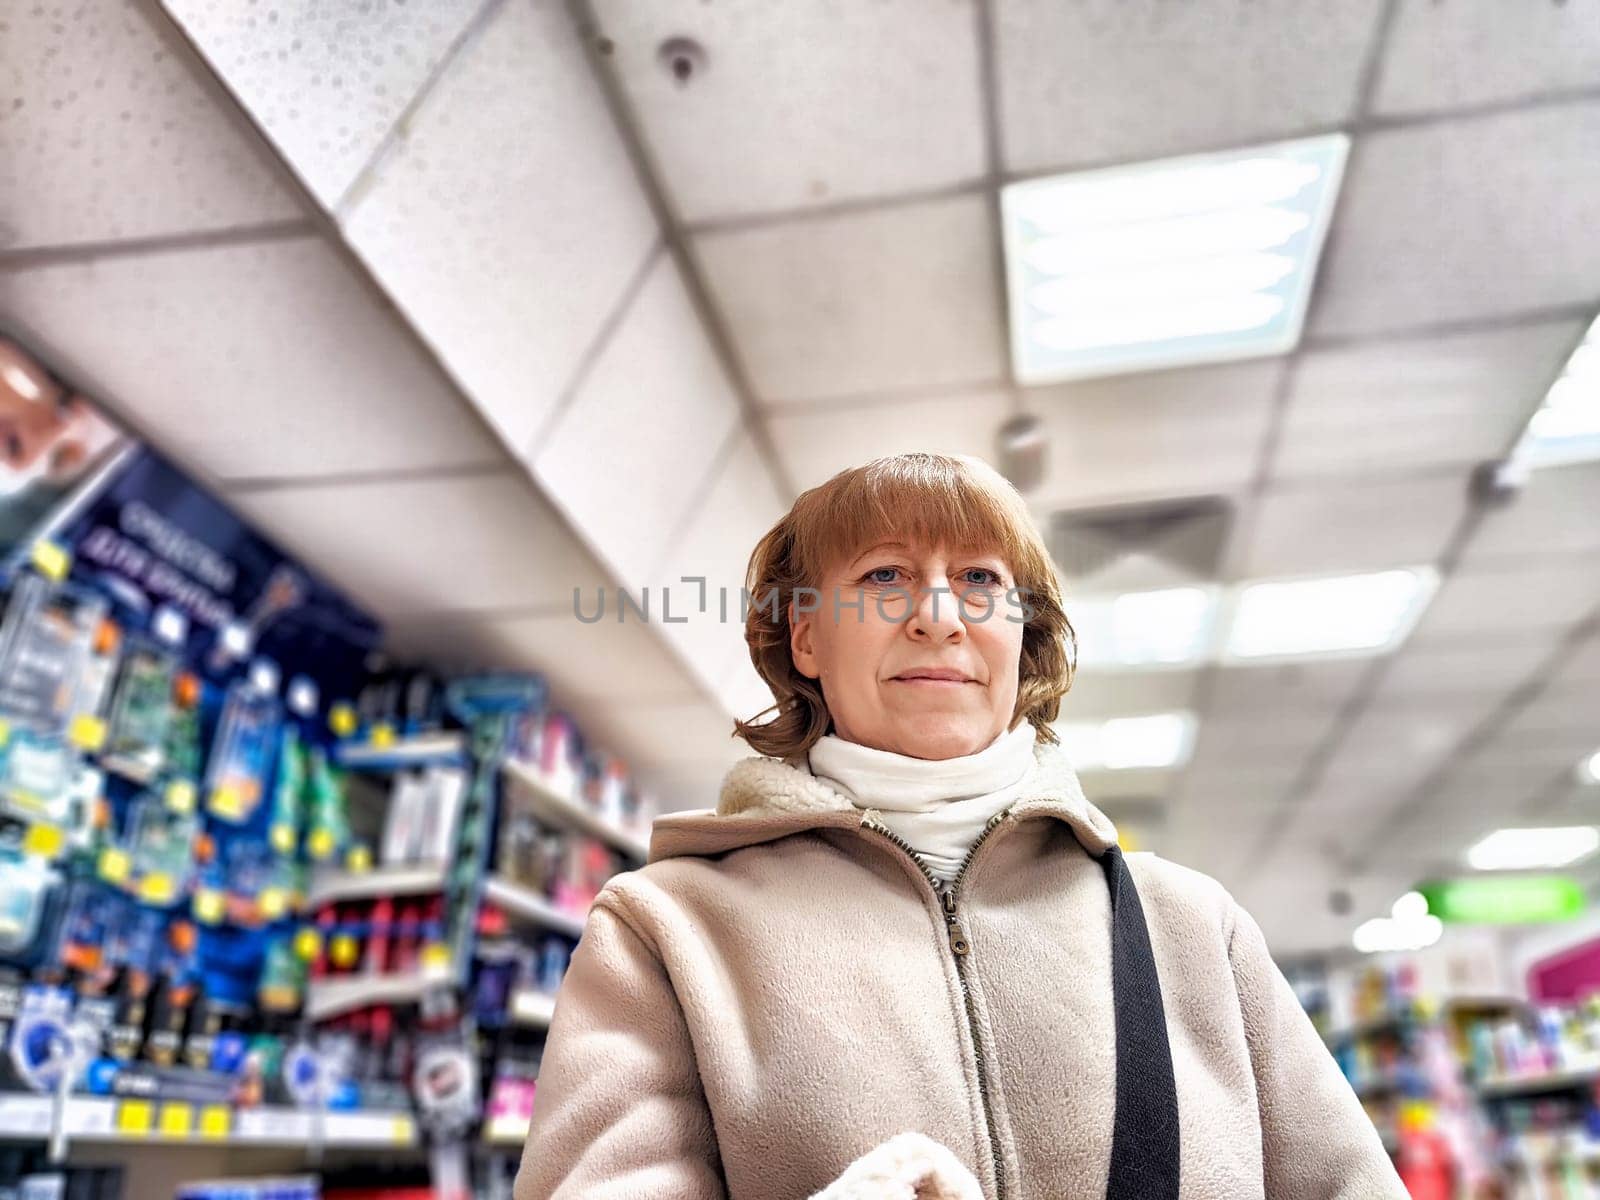 Middle-Aged Woman Shopping for Care Products at a Cosmetics Store. A woman browsing care products in well-stocked cosmetics aisle